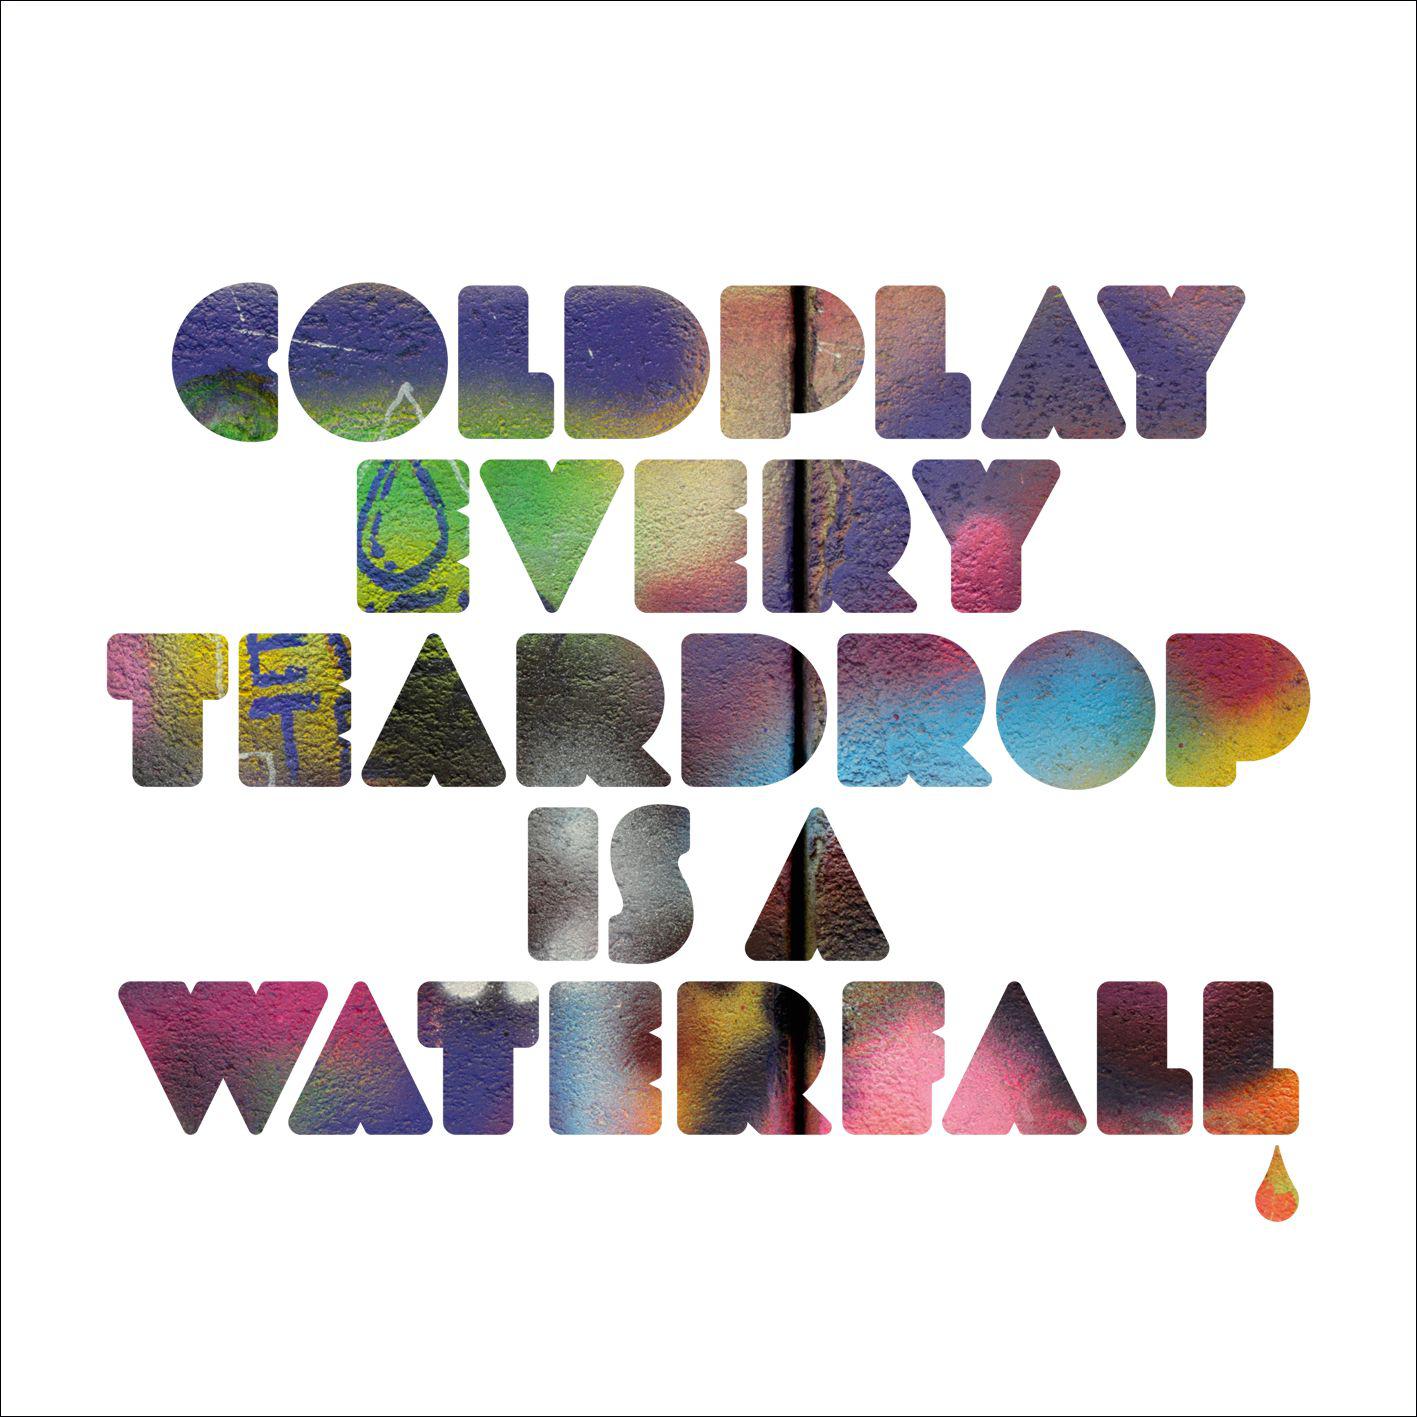 Moving to Mars歌词 歌手Coldplay-专辑Every Teardrop Is a Waterfall-单曲《Moving to Mars》LRC歌词下载